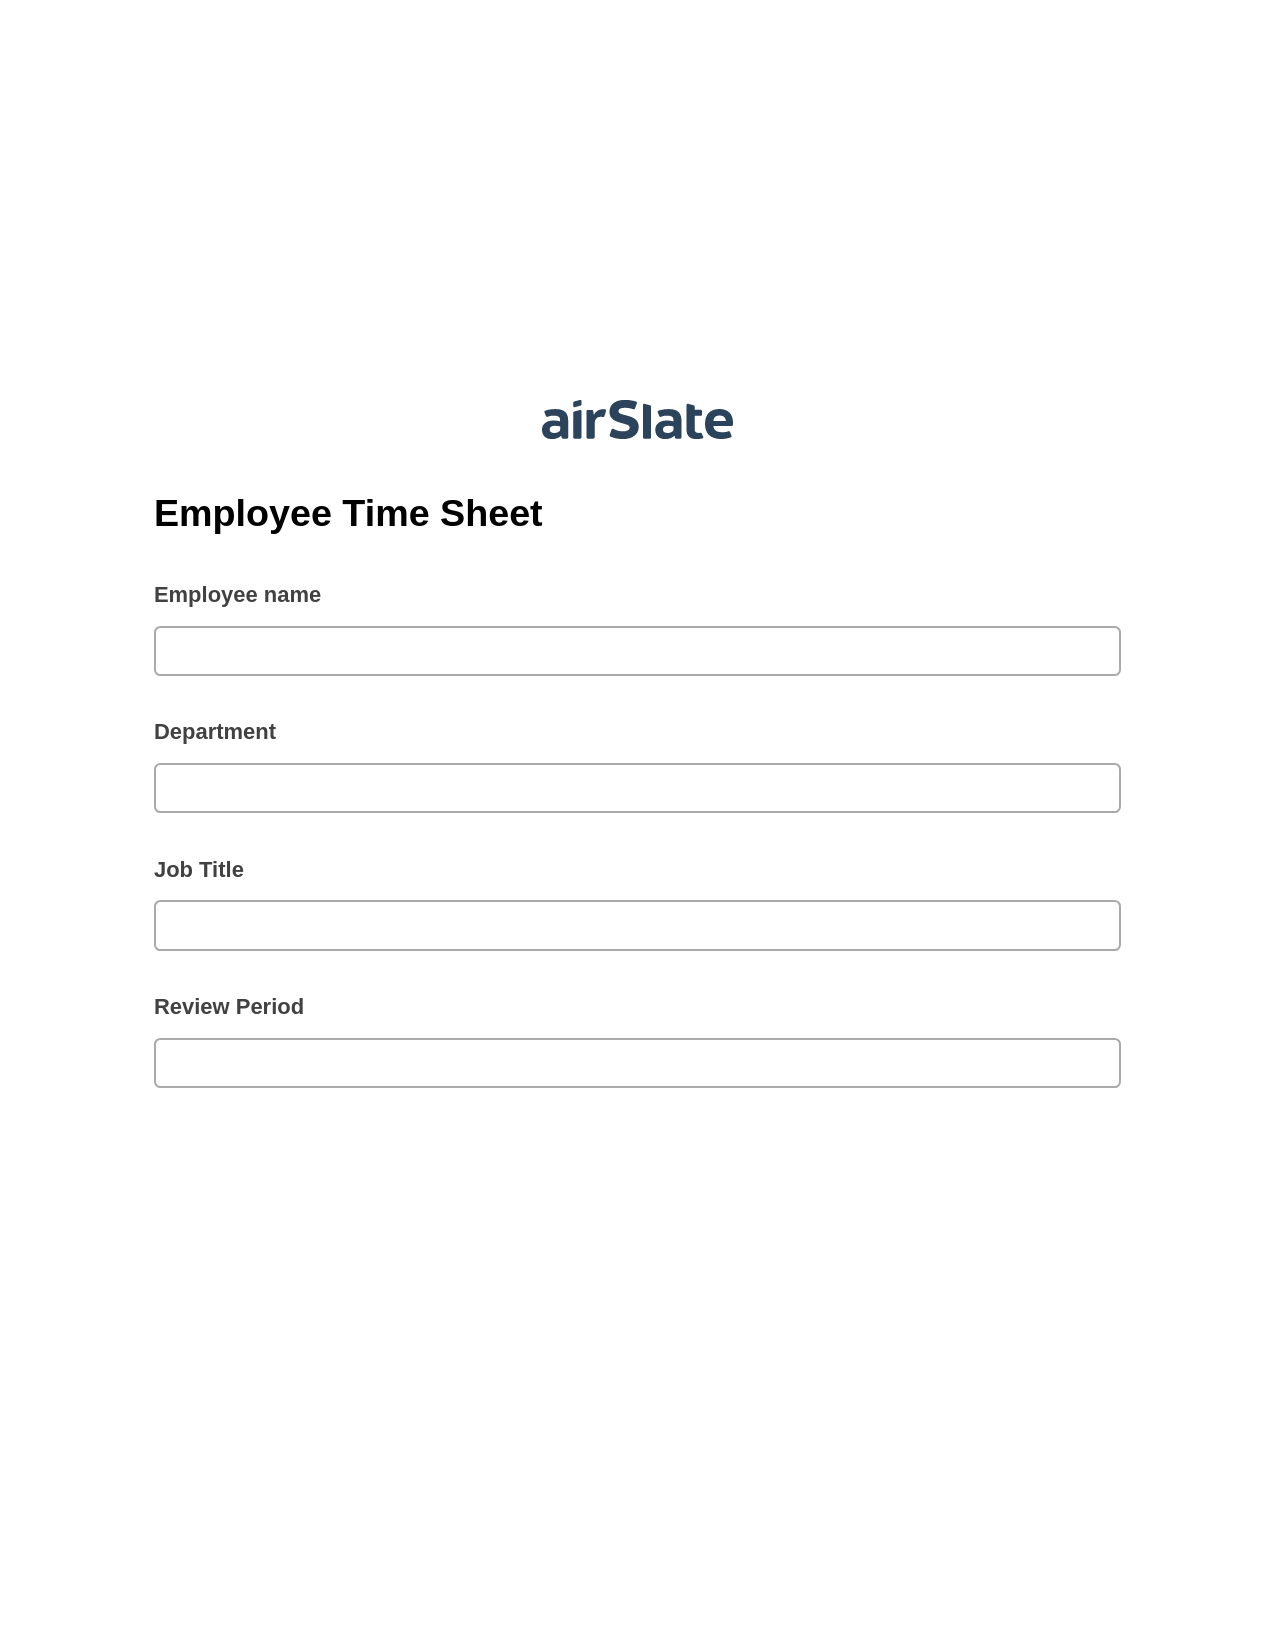 Employee Time Sheet Prefill from NetSuite records, Create slate addon, Archive to OneDrive Bot